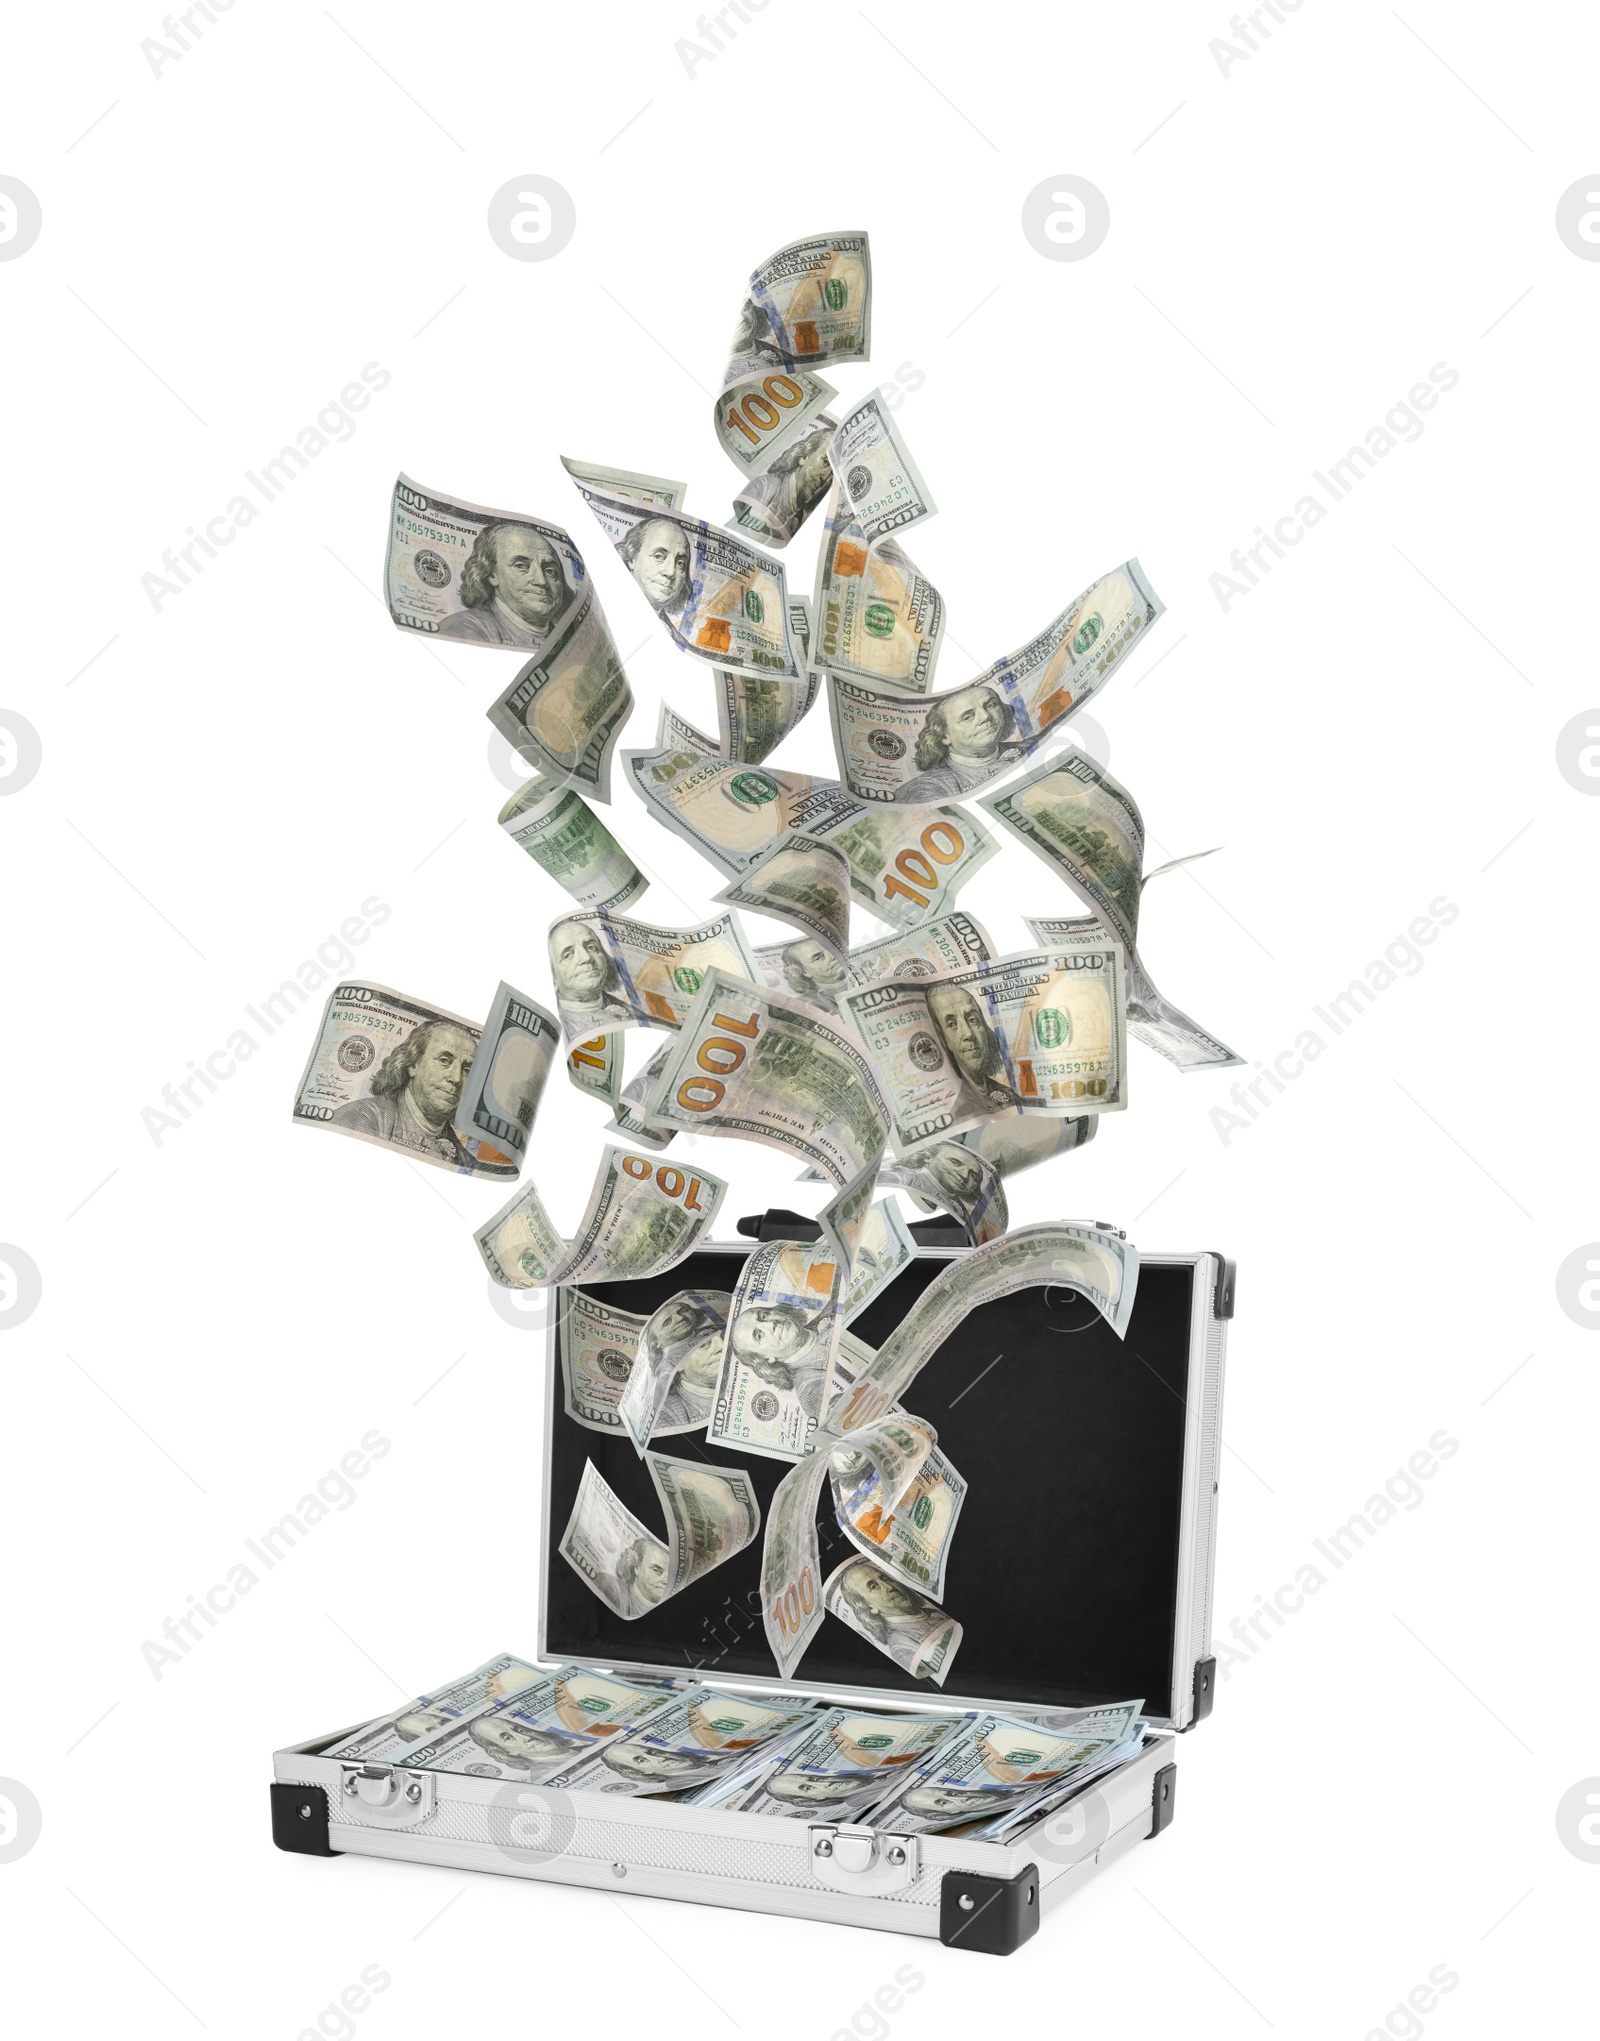 Image of Metal case and American dollars on white background. Flying money